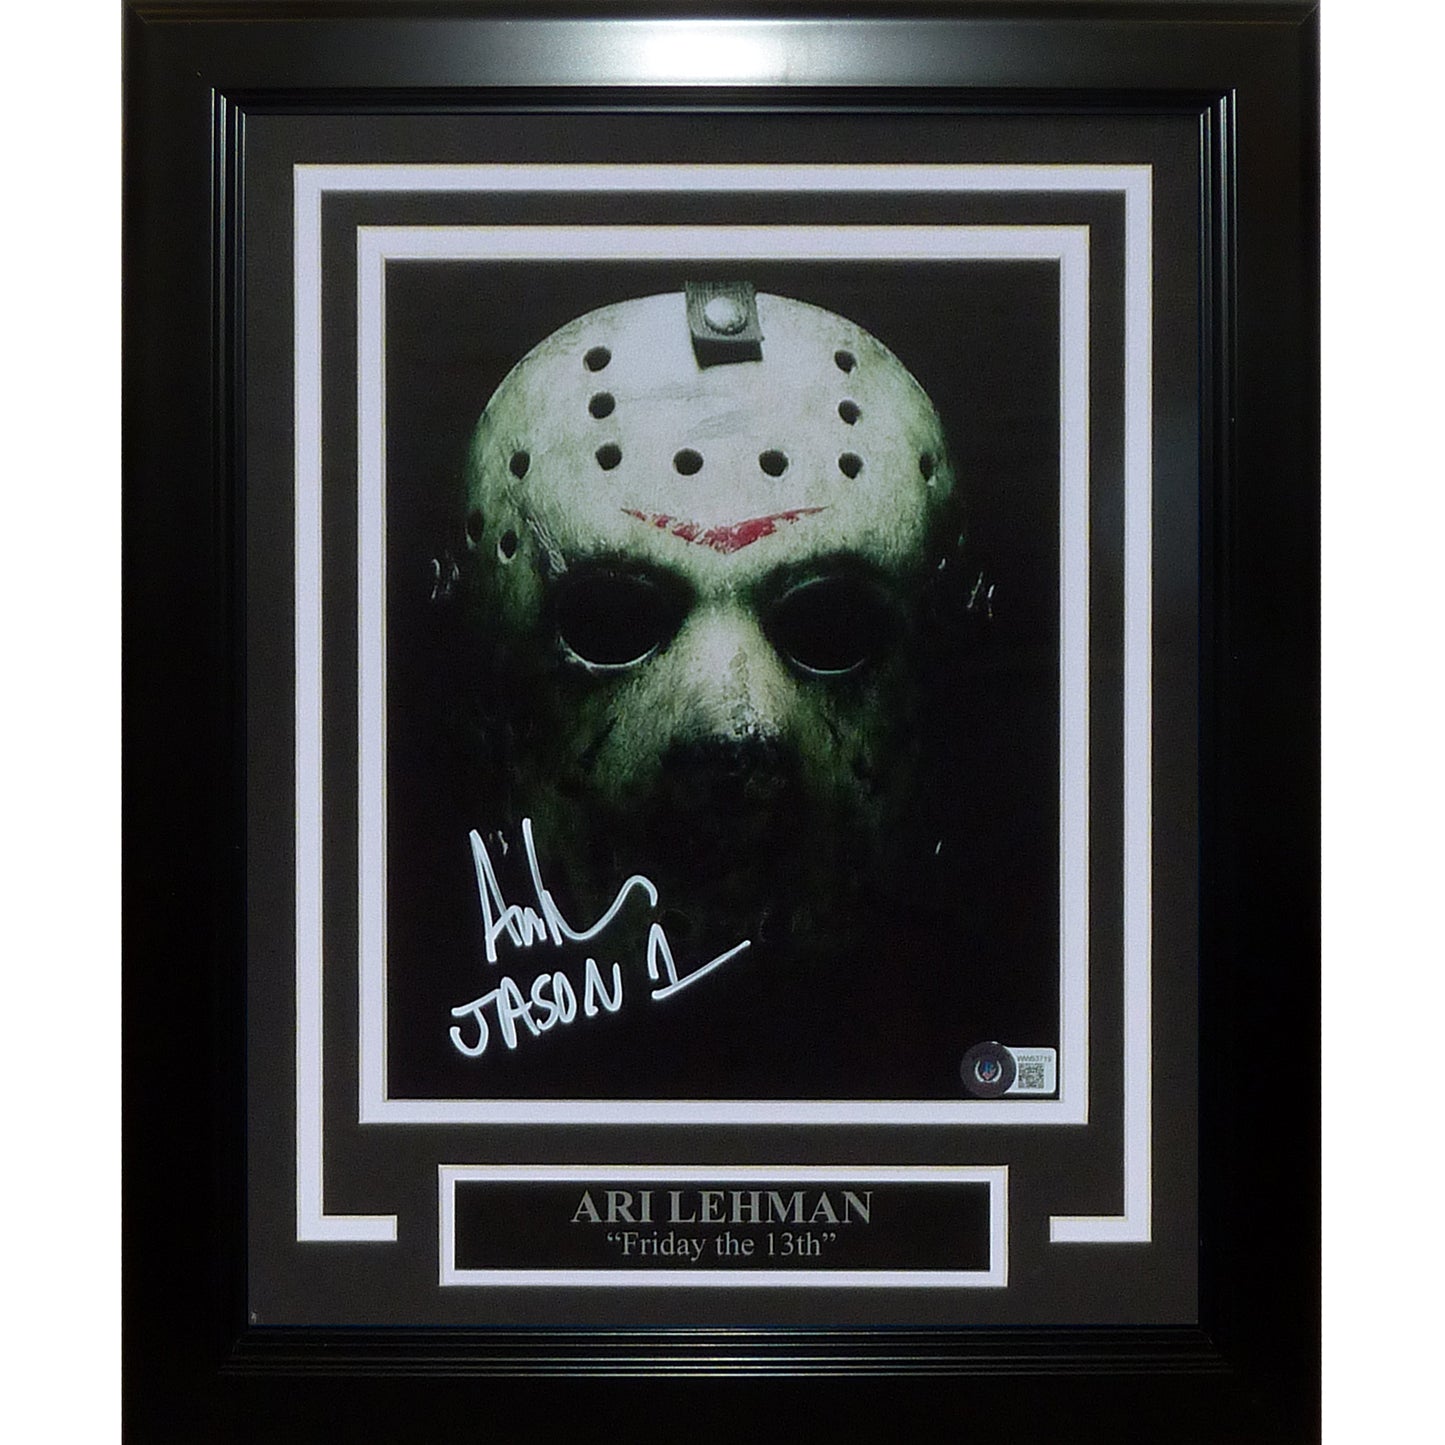 Ari Lehman Autographed Friday the 13th Deluxe Framed 8x10 Photo